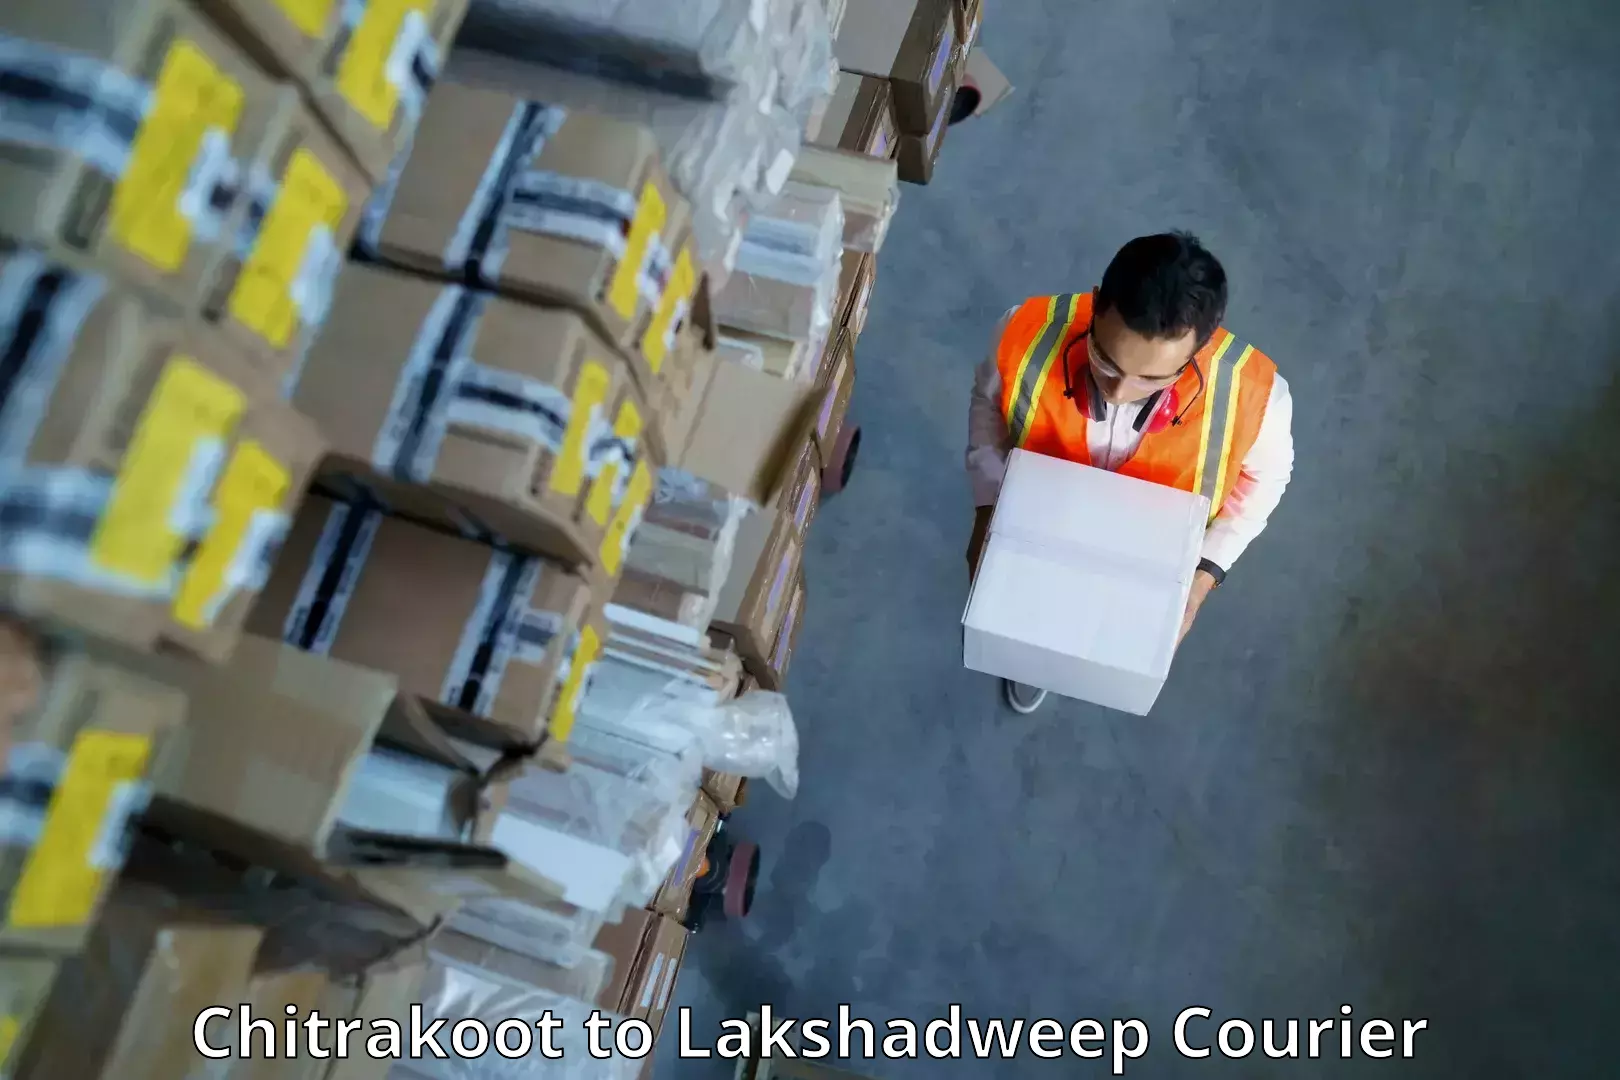 Multi-national courier services Chitrakoot to Lakshadweep